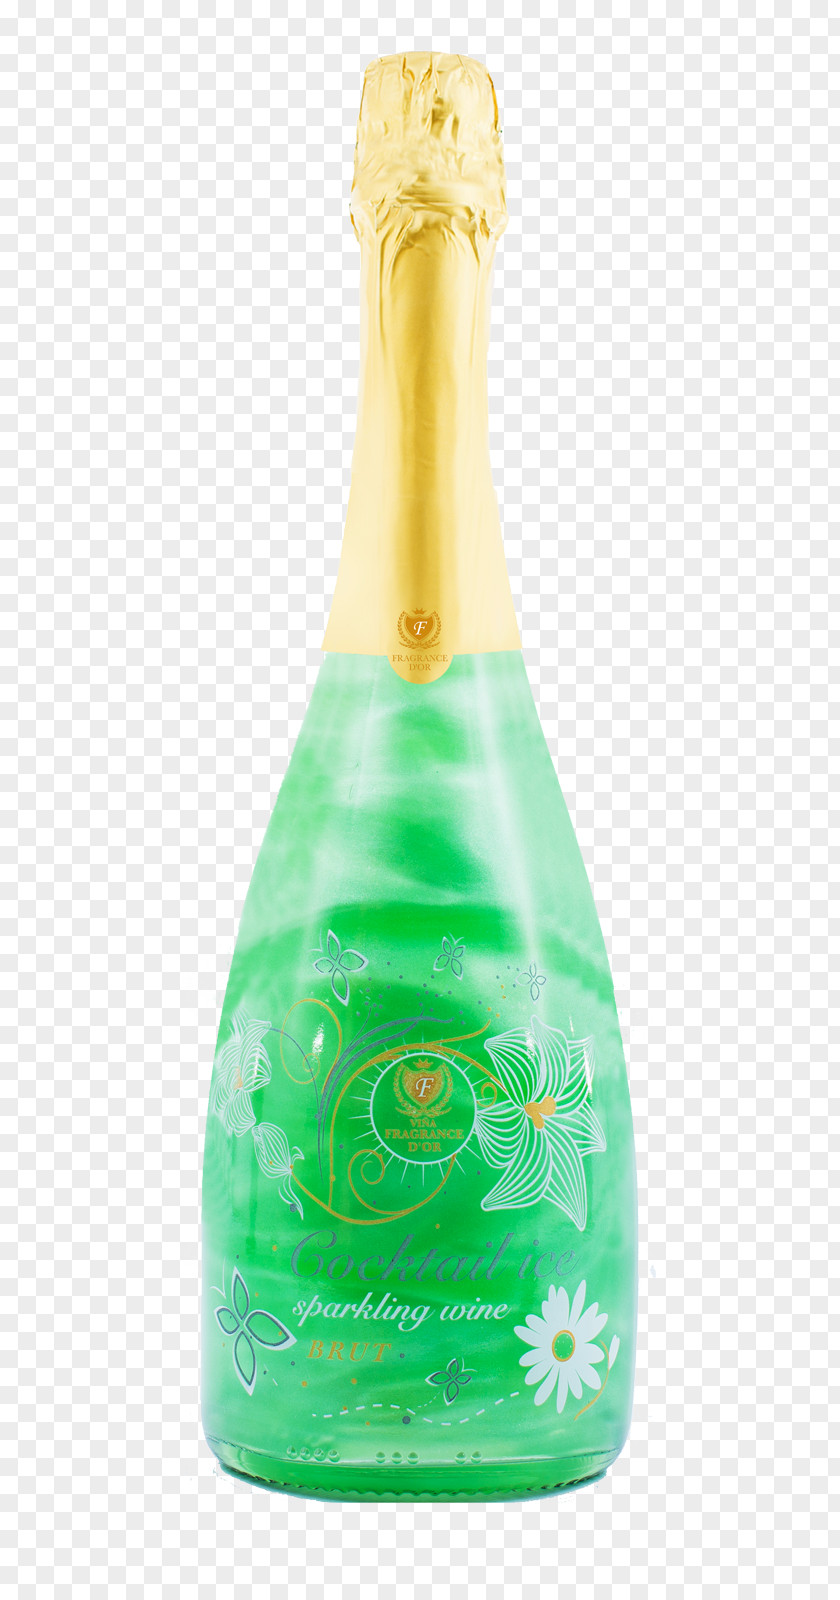 Champagne Mojito Glass Bottle Cocktail Liqueur PNG